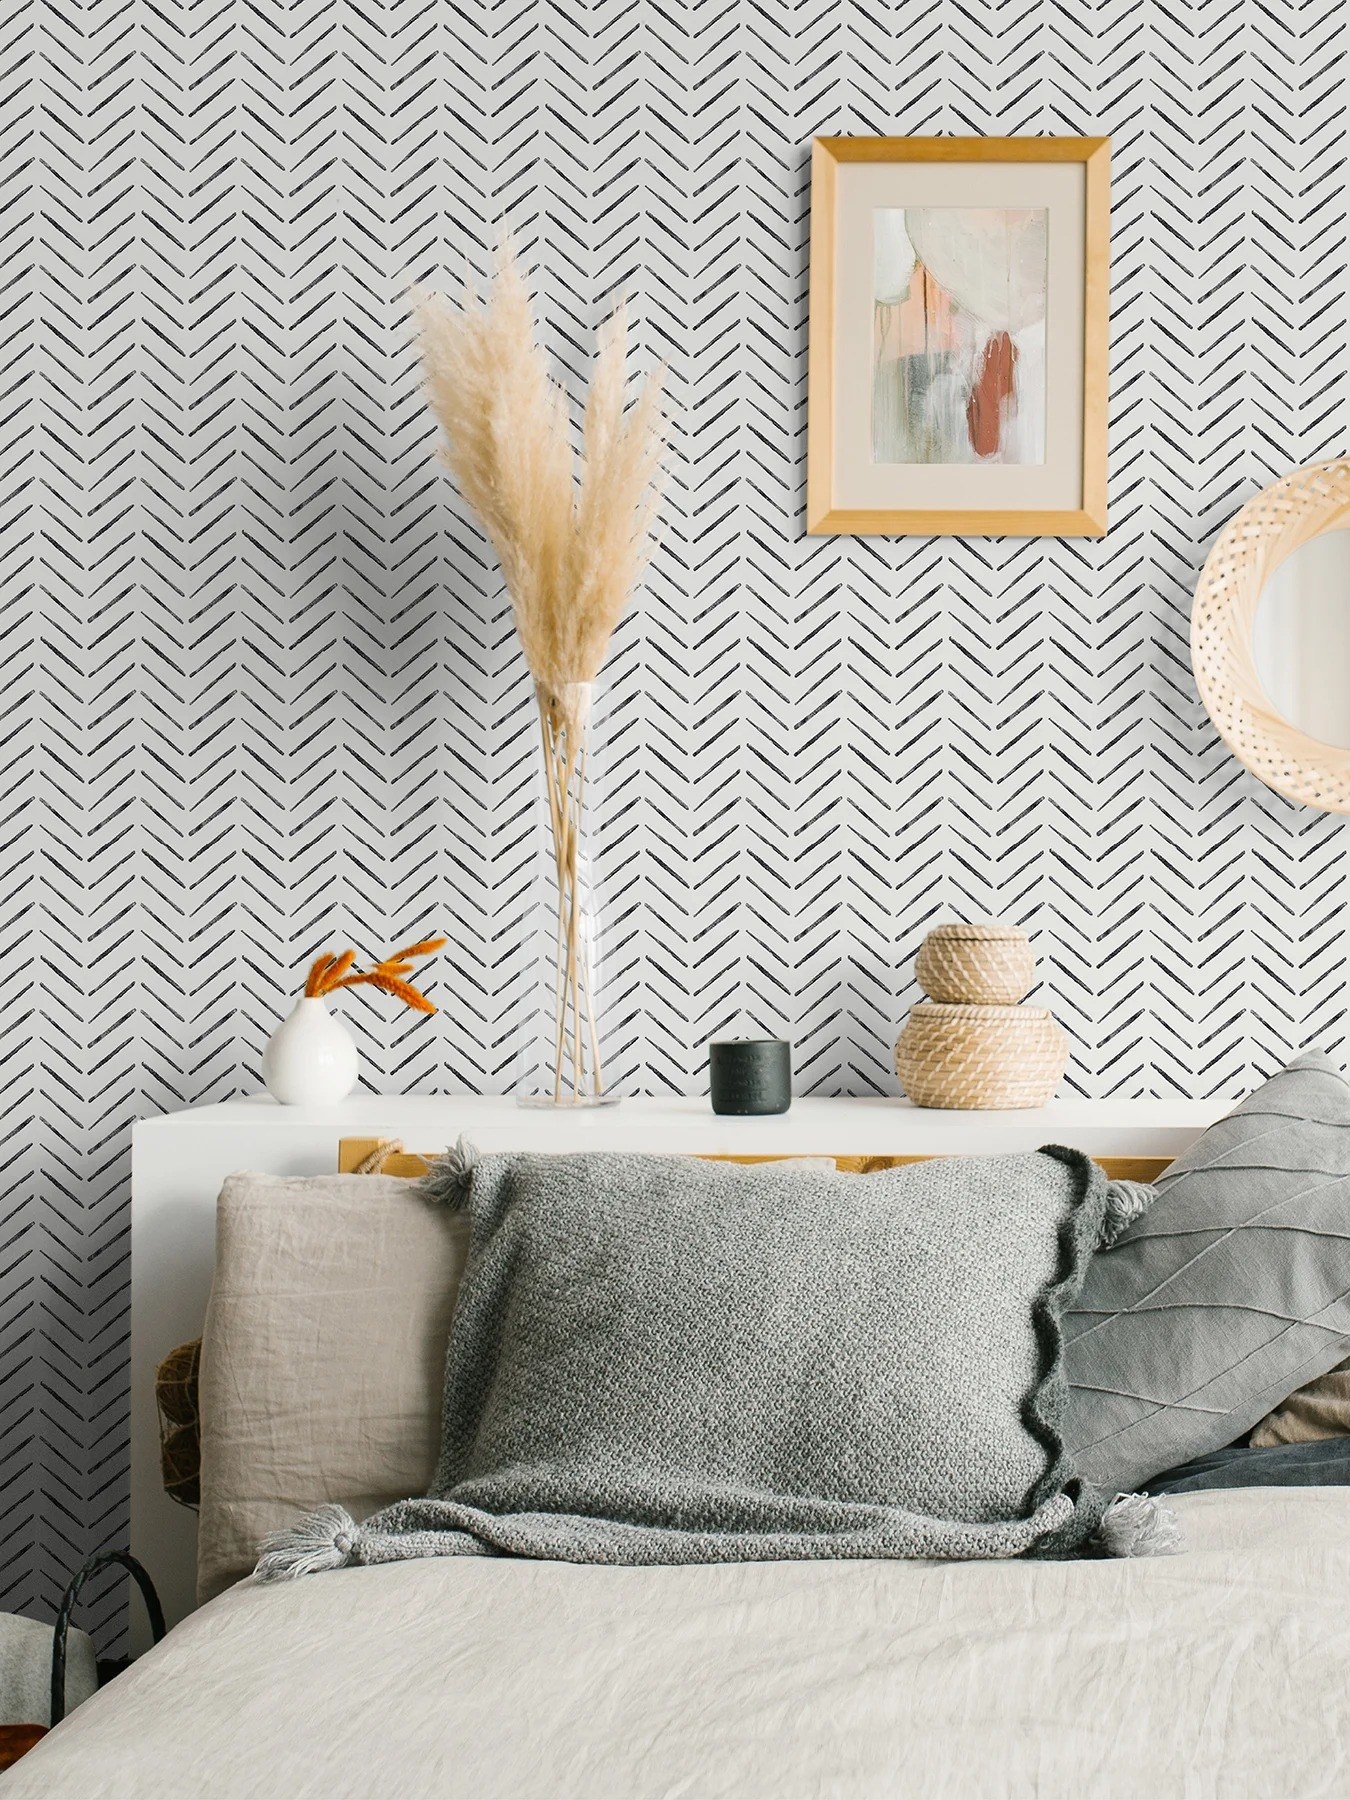 the black and white chevron wallpaper above a bed